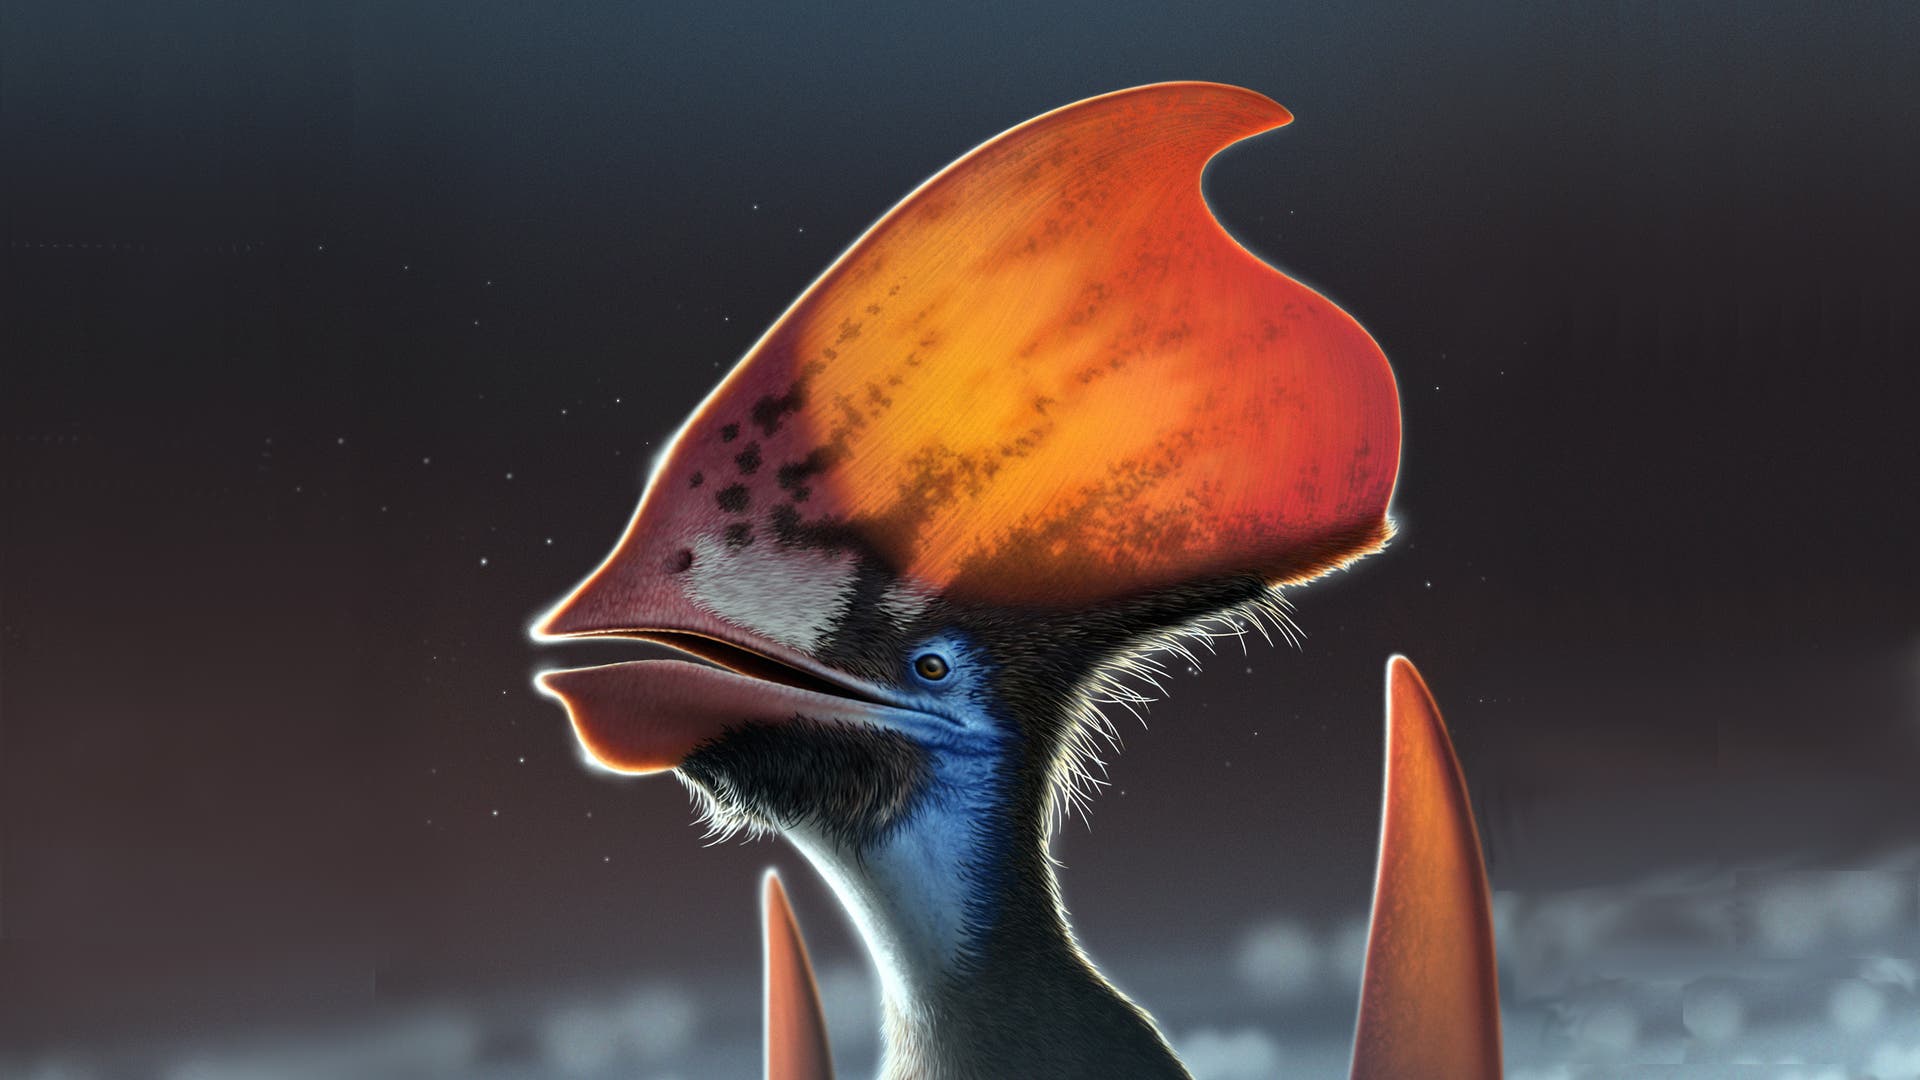 Dino debate: pterosaurs wore their own colorful feathers